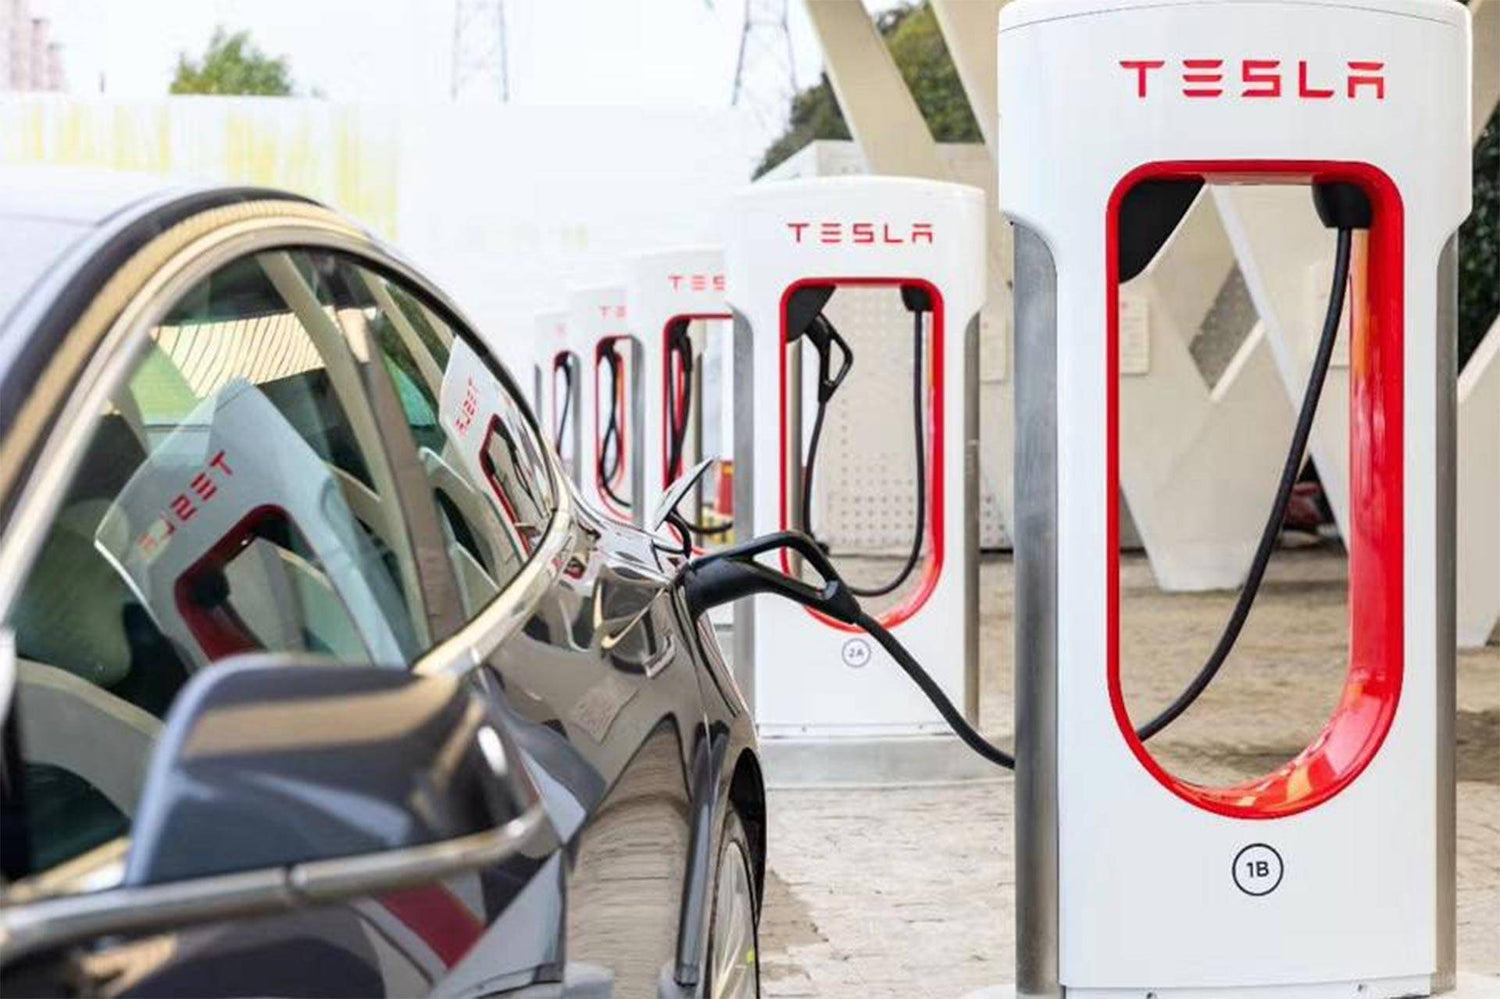 Tesla Supercharging Network From 6 Stations in California to 16,320 Charging Stalls Globally